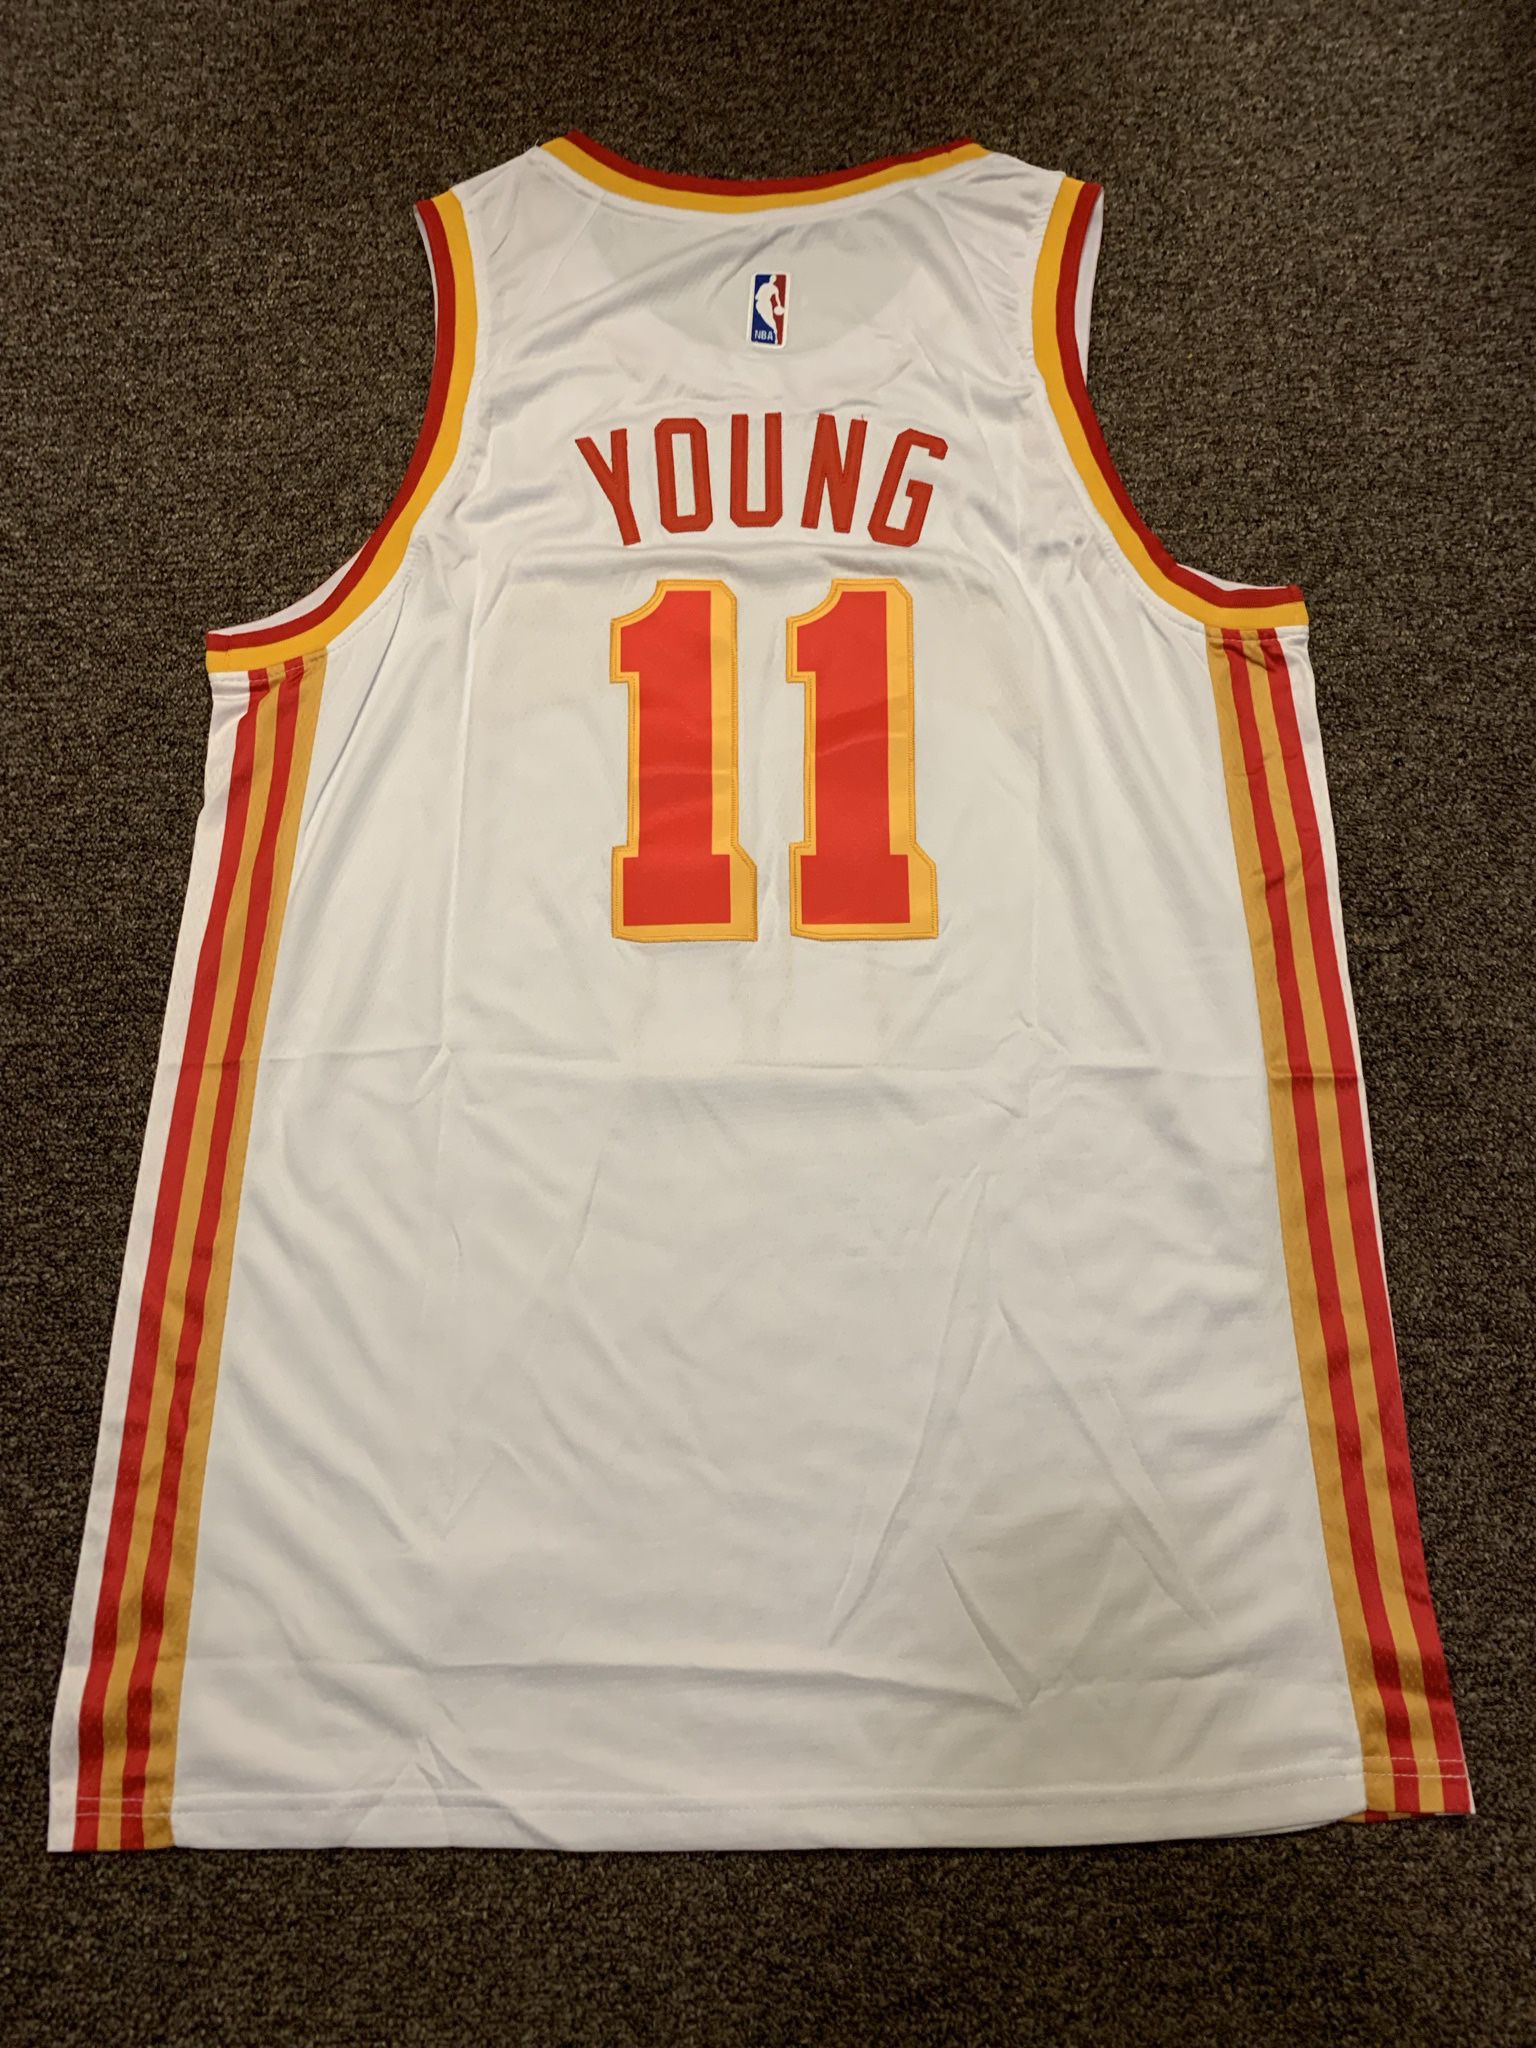 New Atlanta Hawks Throwback Jersey for Sale in Peabody, MA - OfferUp